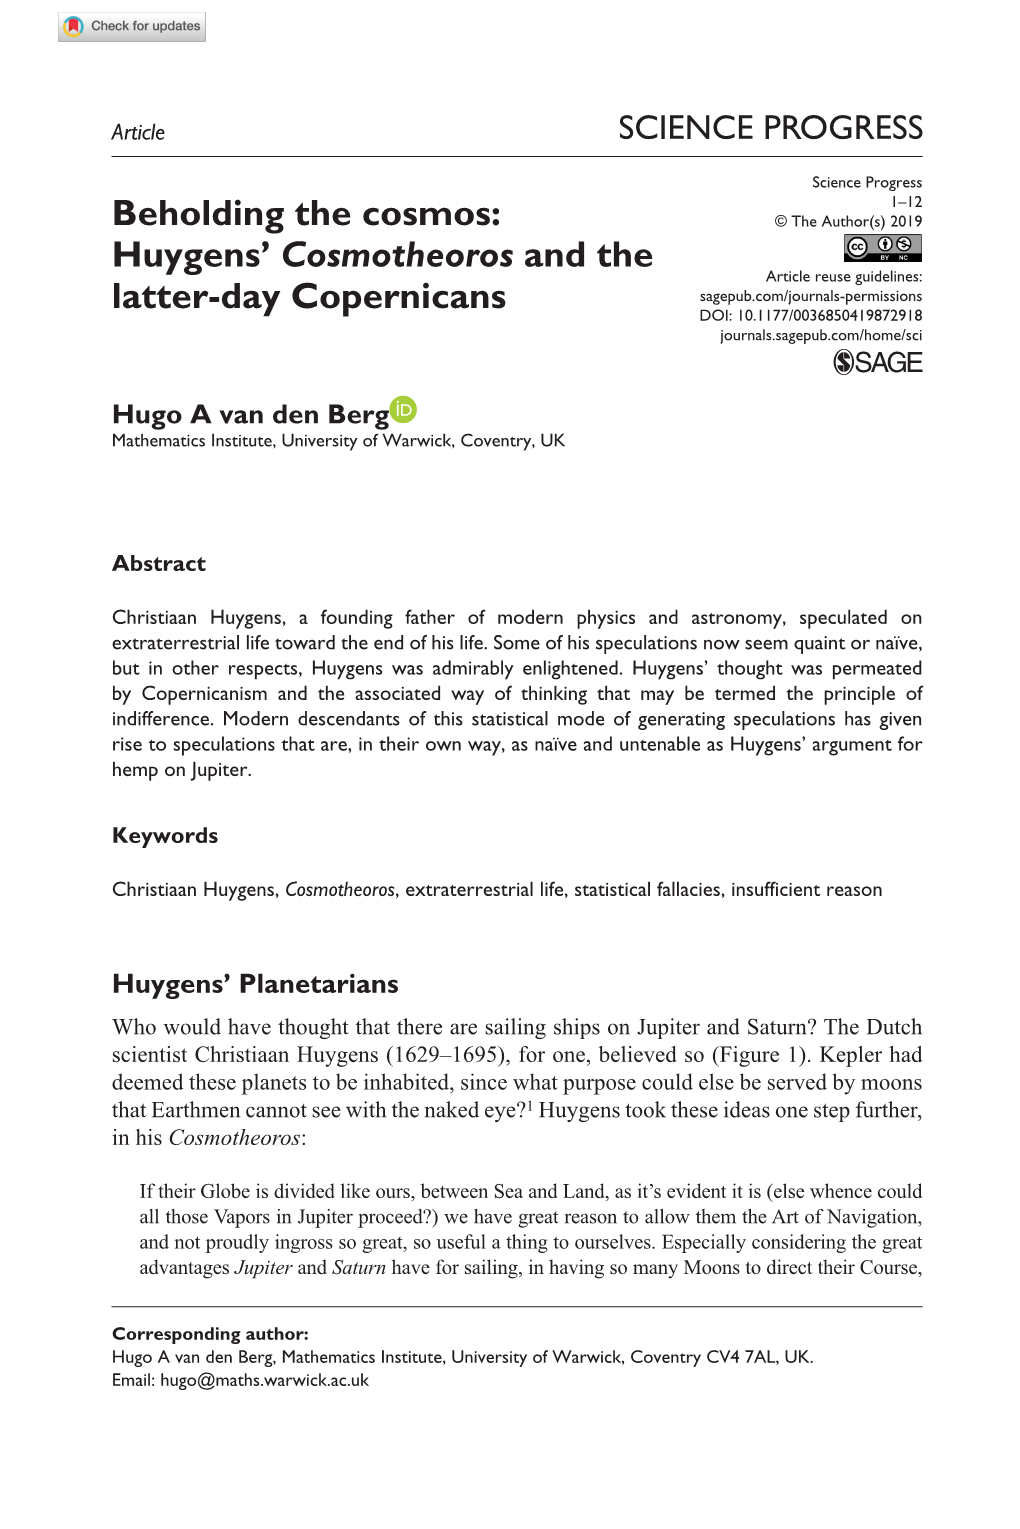 Huygens' Cosmotheoros and the Latter-Day Copernicans